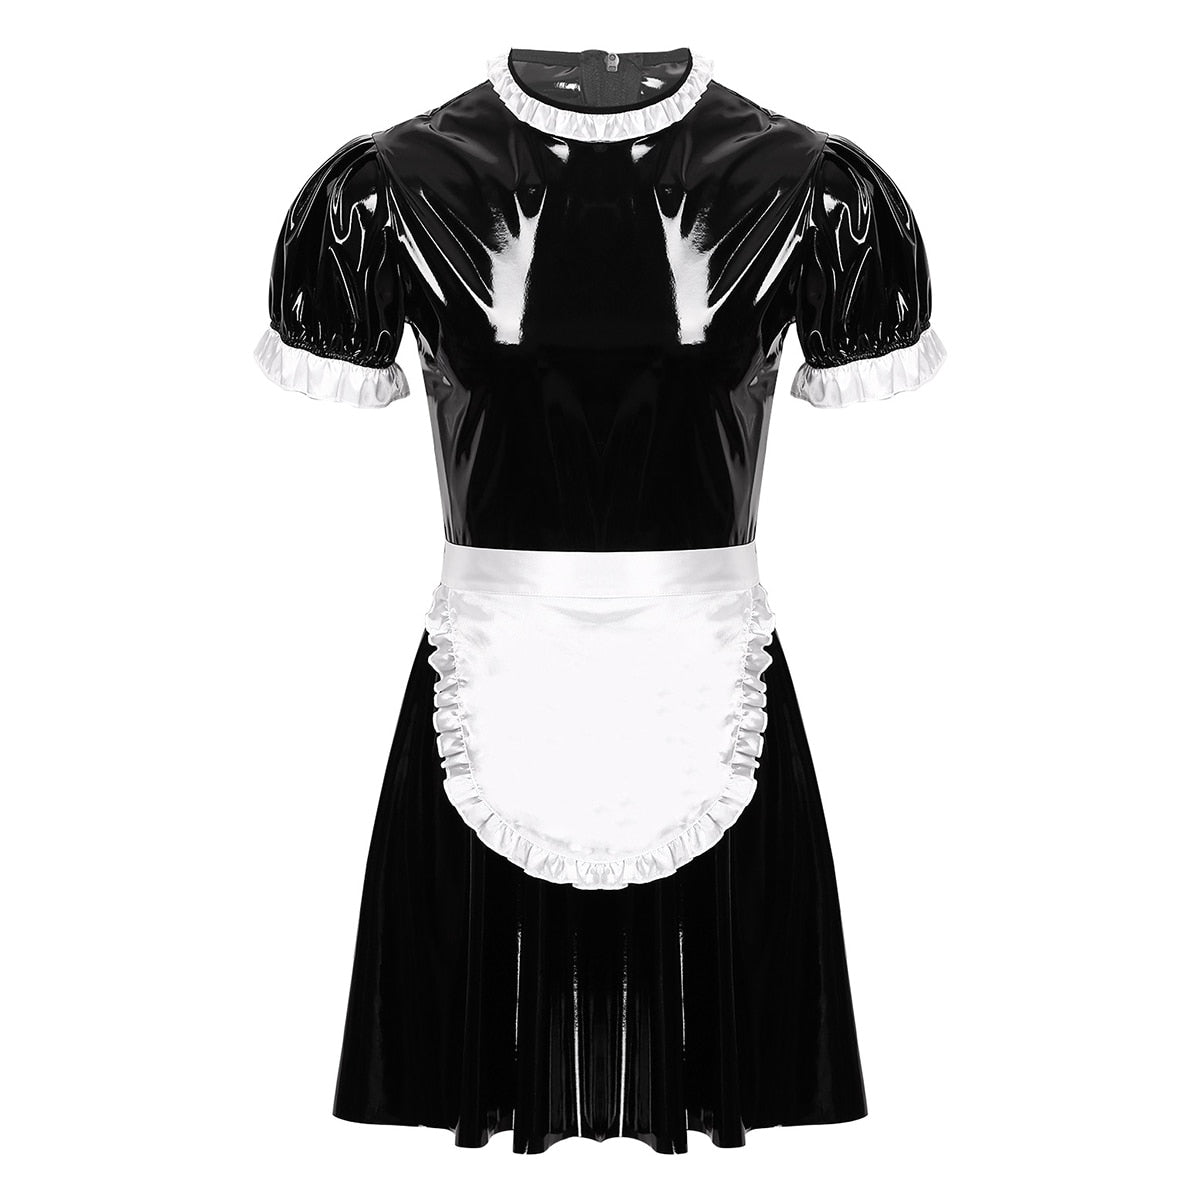 Maid Outfit For Men